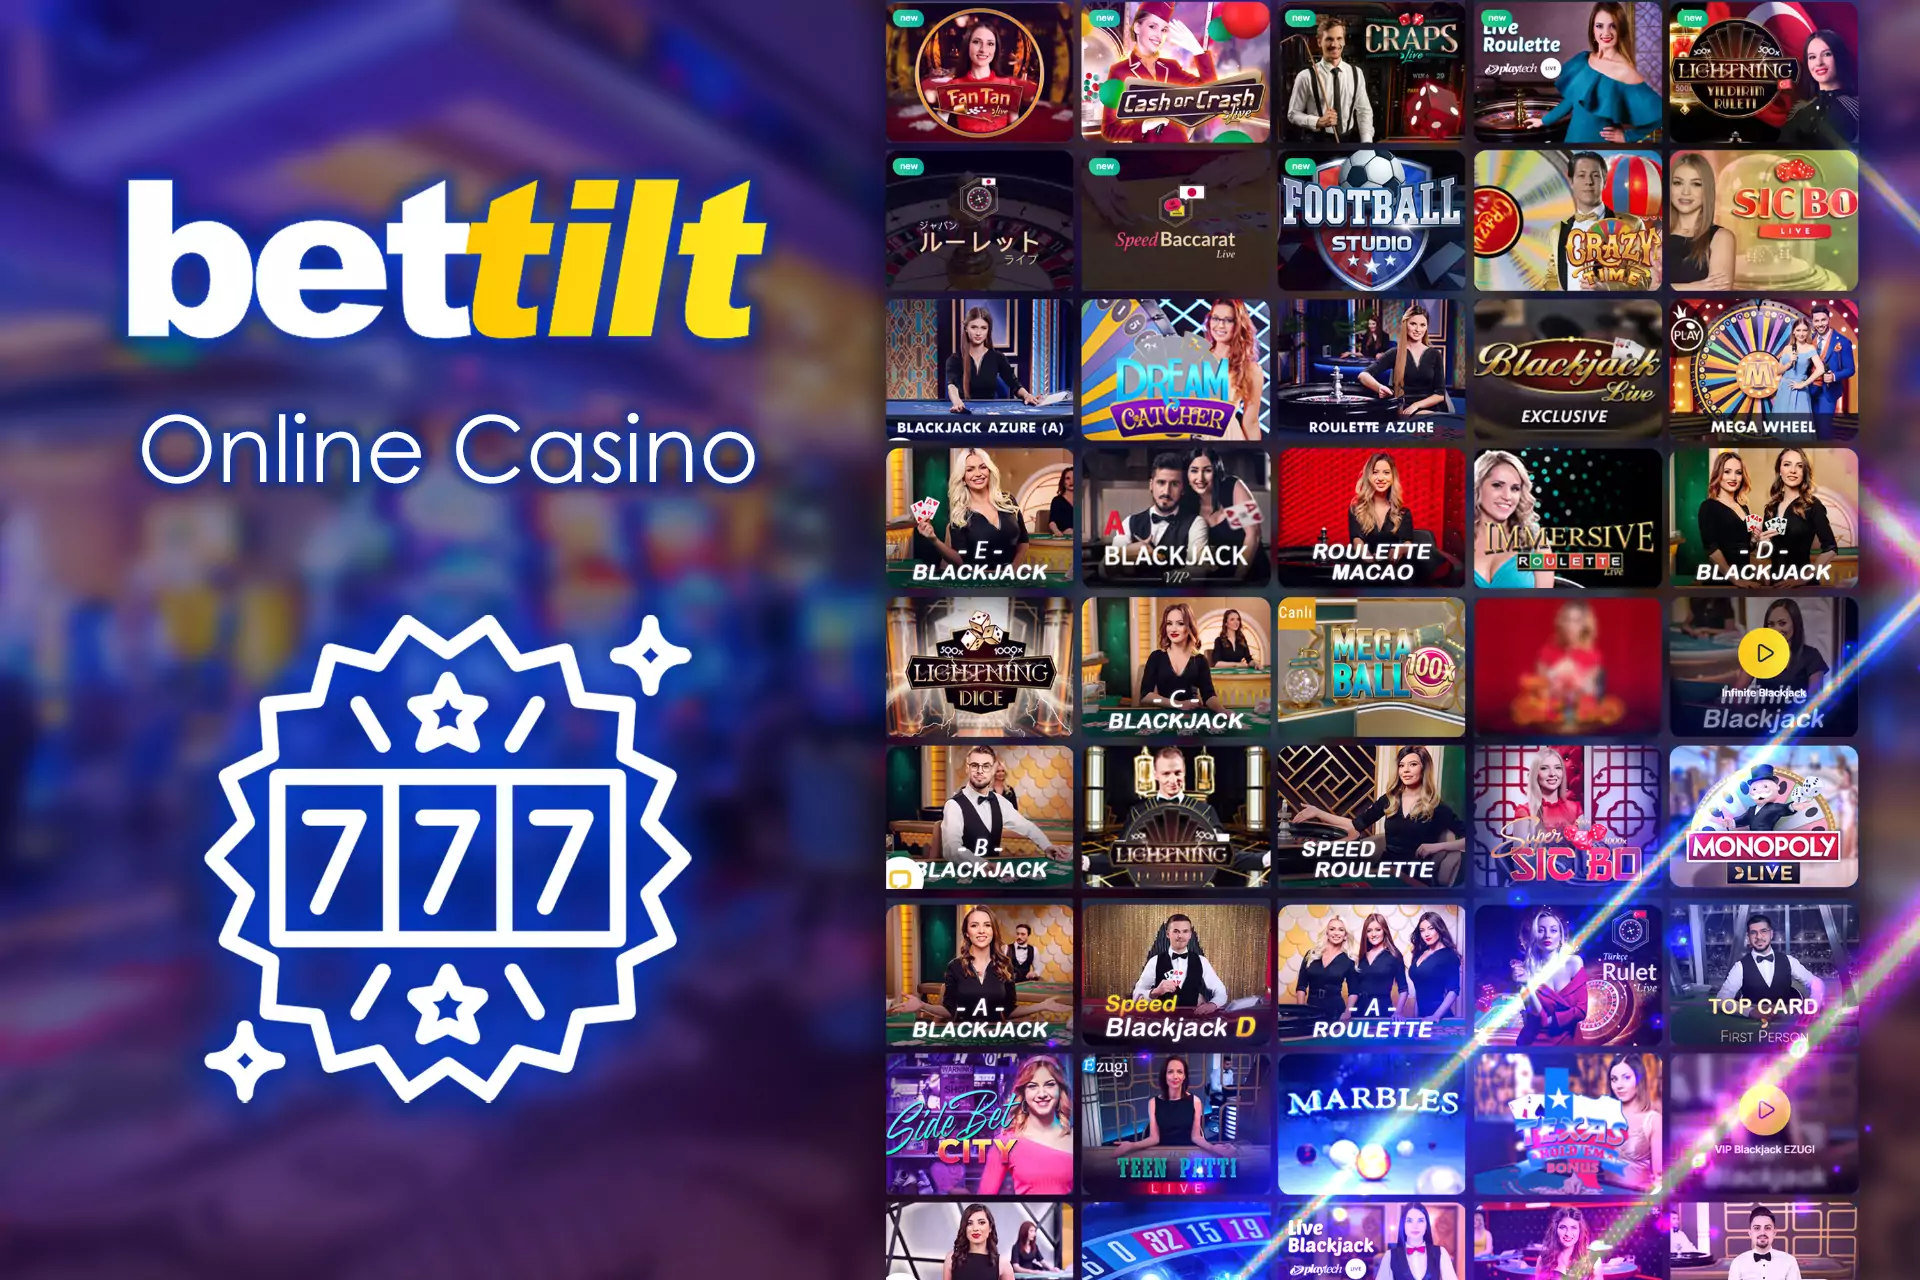 Casino games are available to play in the special sections on the site and in the apps.